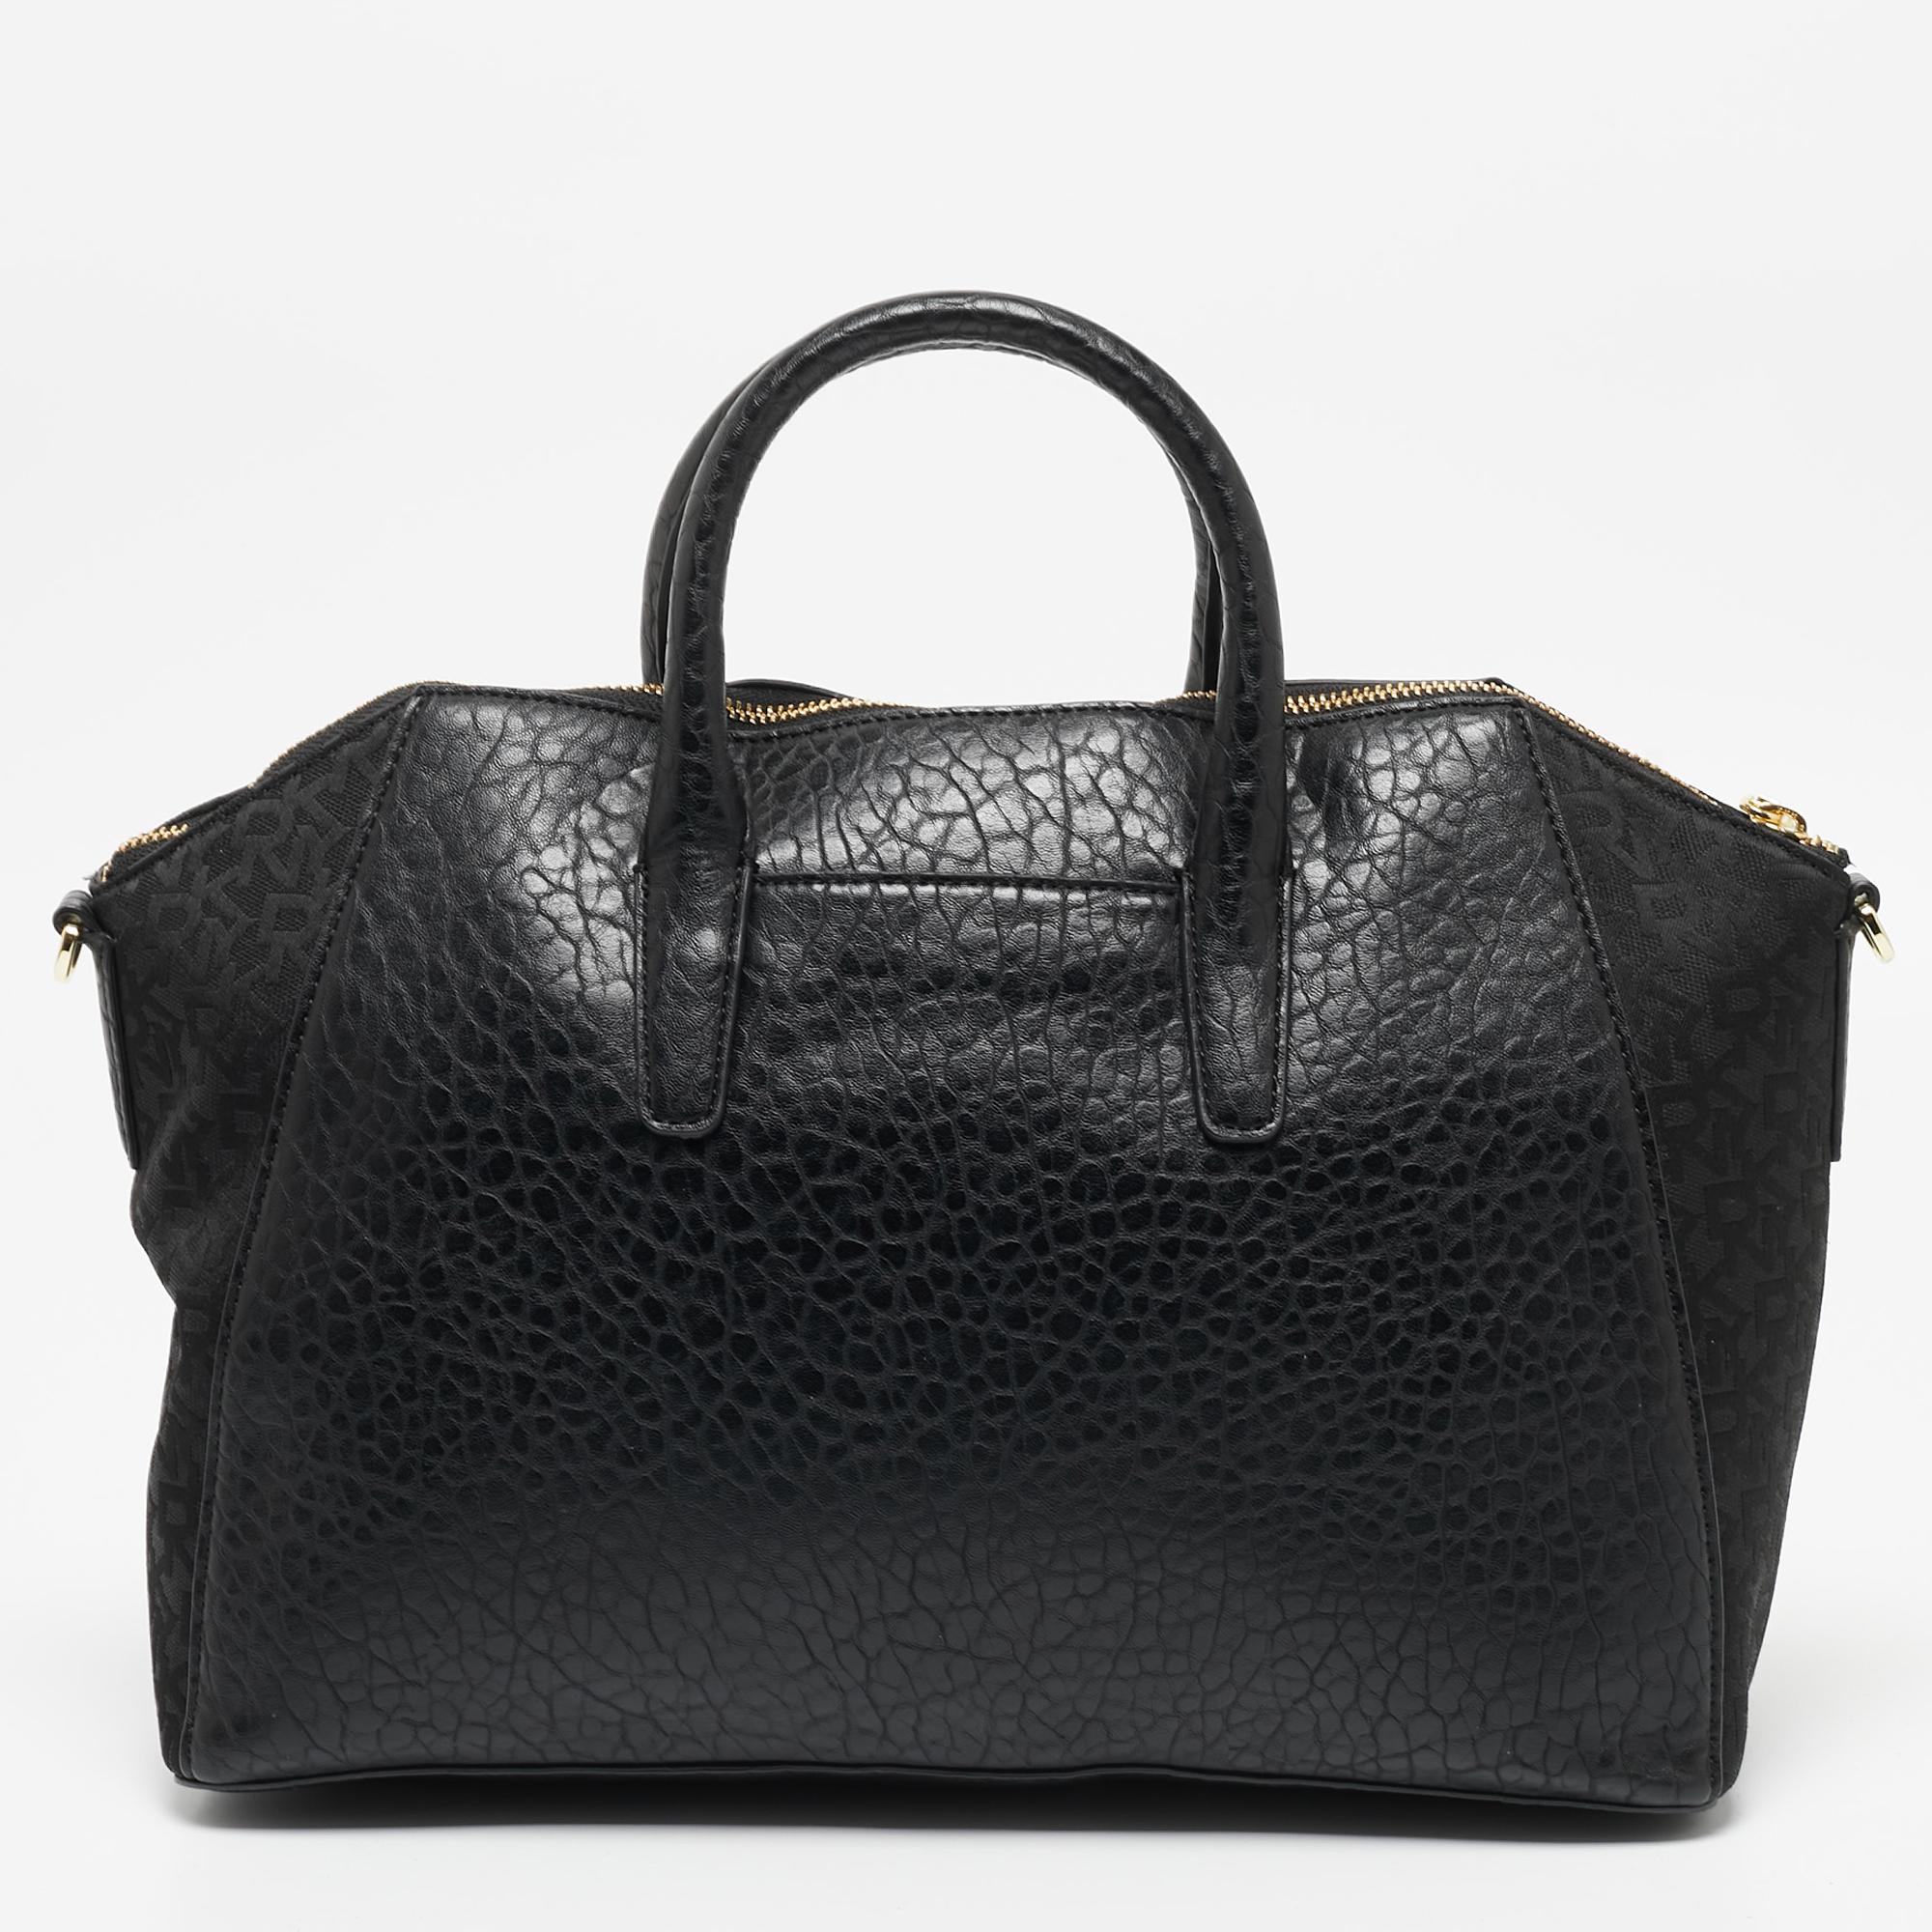 DKNY Black Signature Canvas And Leather Ewen Studded Satchel